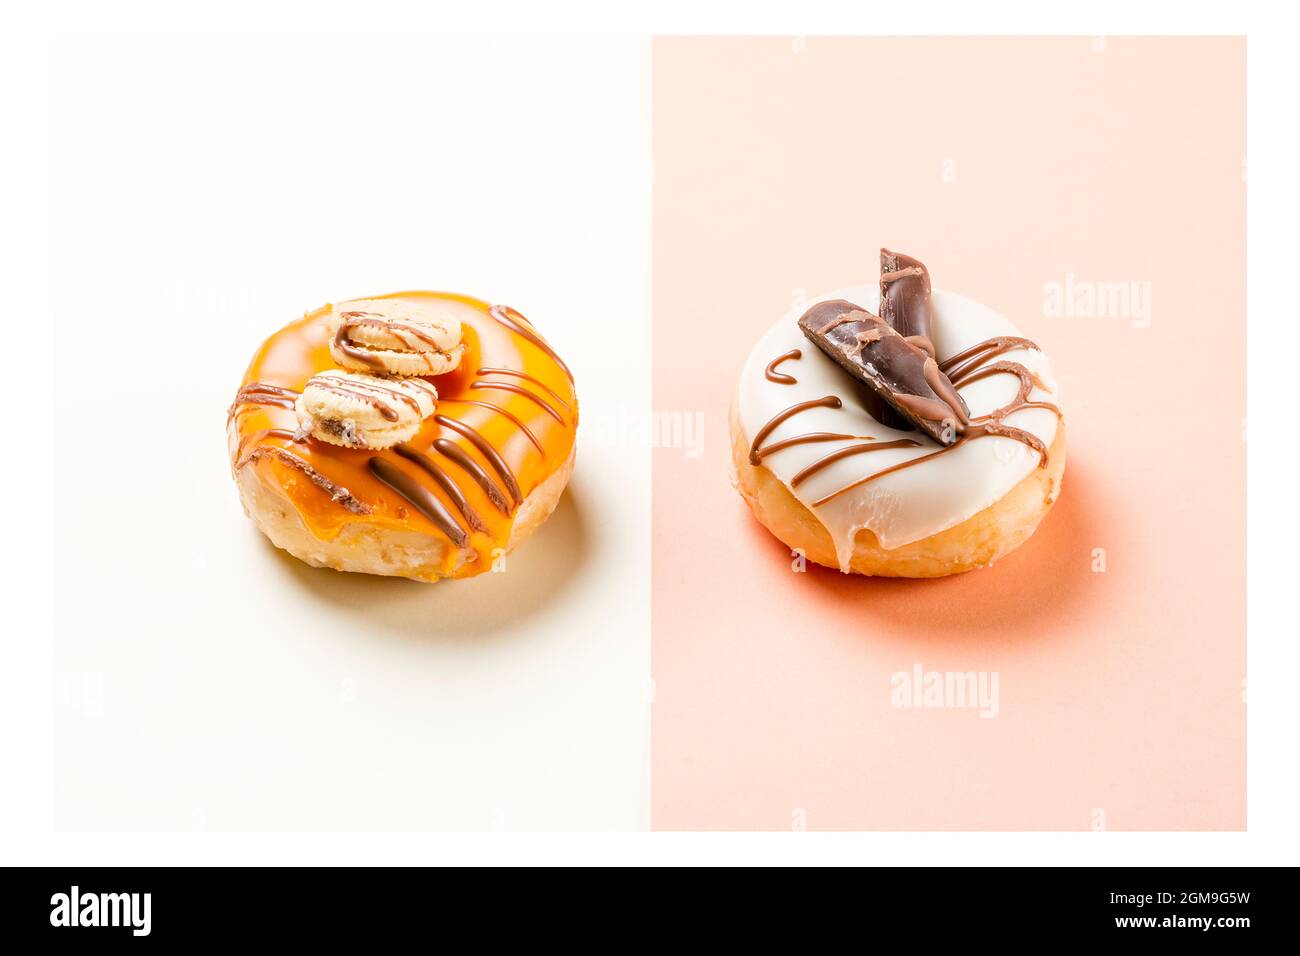 Photograph of two donuts decorated with cookies and drawn with chocolate.The photo is taken in landscape format and has a white frame around it. Stock Photo